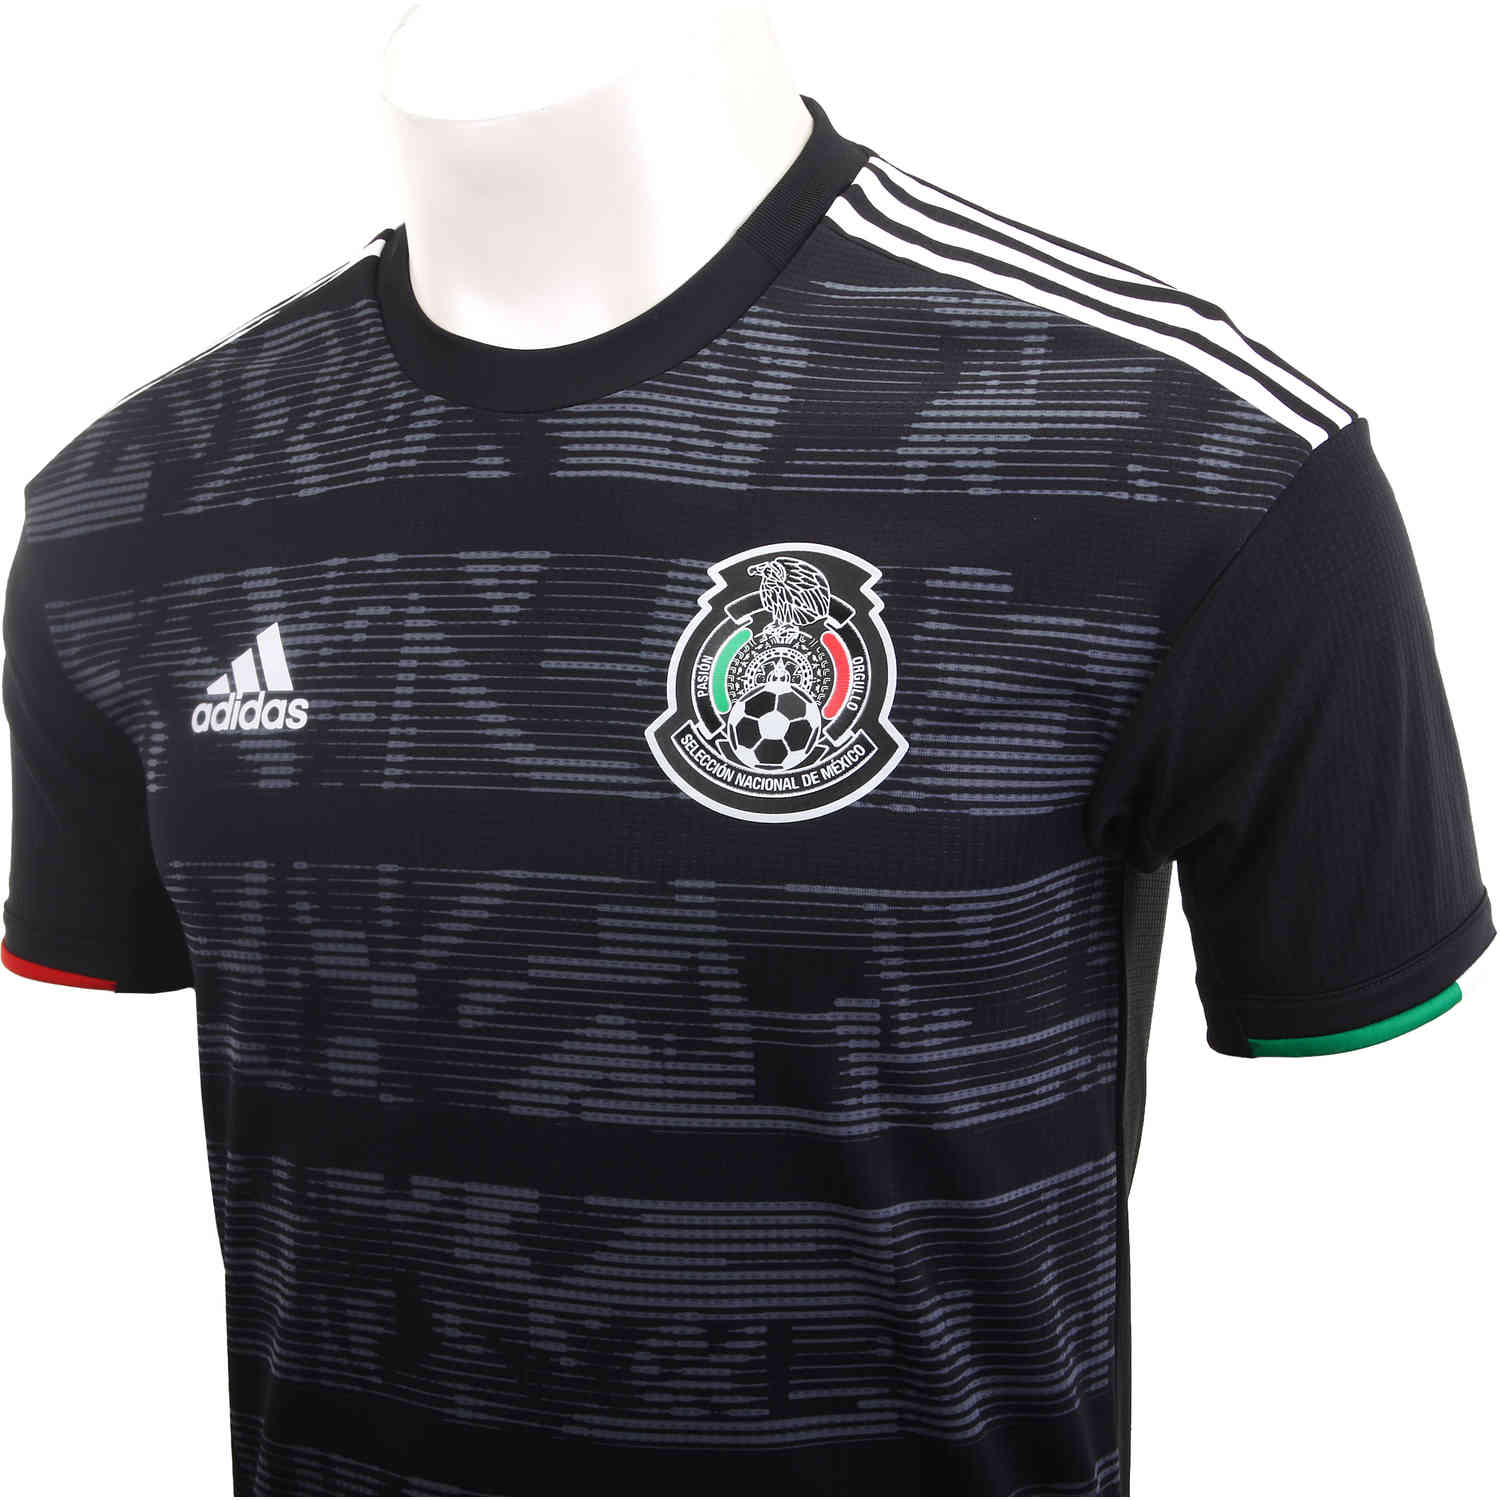 mexico adidas jersey 2019 cheap online